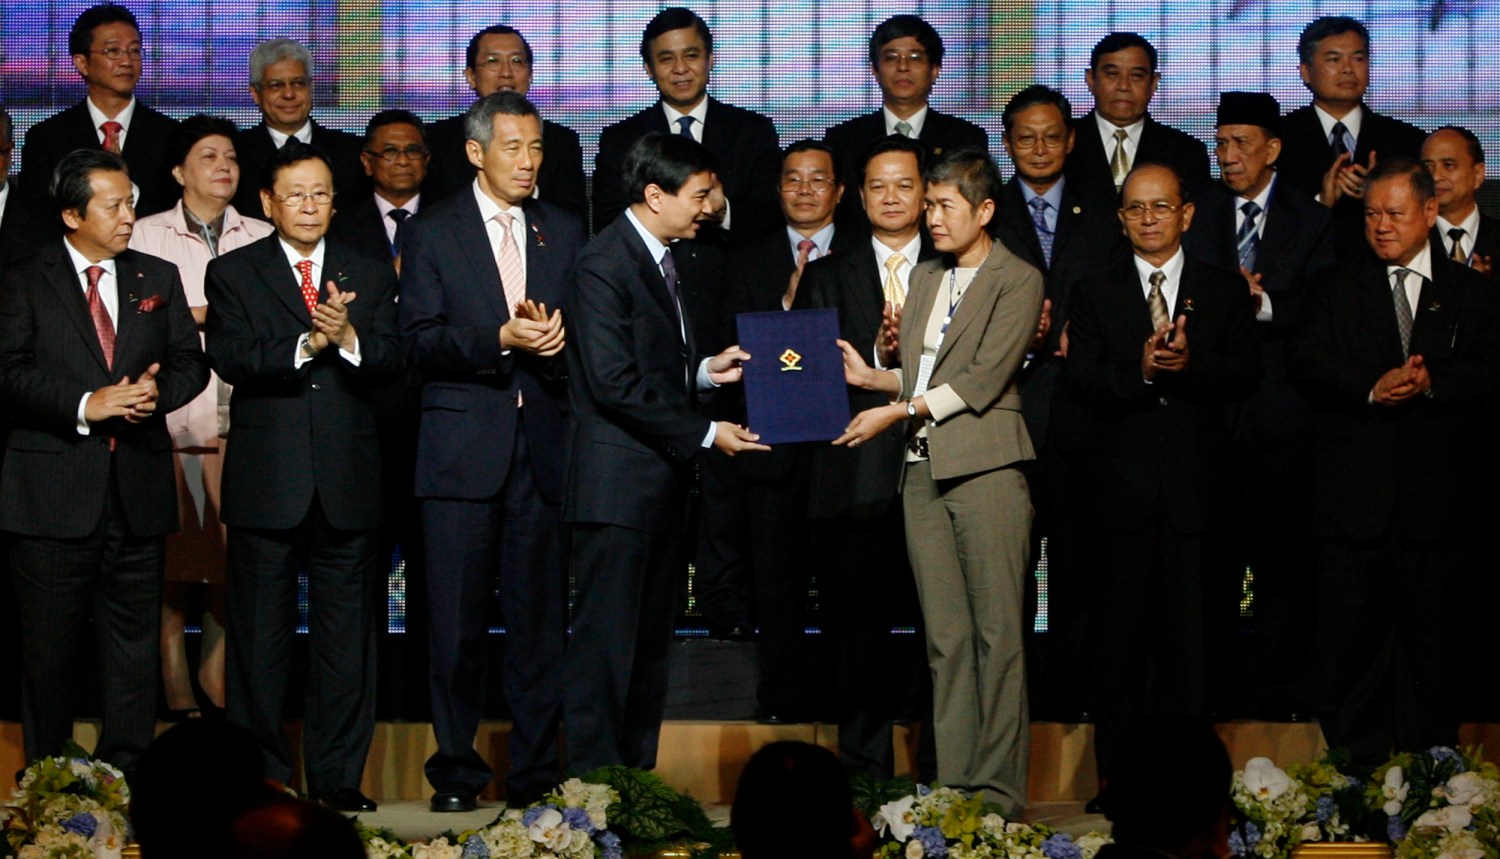 Thailand's Prime Minister Abhisit Vejjajiva (L) hands to Thai representative Dr. Sriprapha Petcharamesree (R) a copy of the "Cha-Am Hua Hin Declaration on the Inauguration of the ASEAN Intergovernmental Commission on Human Rights" as ASEAN leaders applaud during the 15th Association of Southeast Asian Nations (ASEAN) summit, in the seaside town of Hua Hin, some 190 km (118 miles) south of Bangkok, October 23, 2009. South East Asian leaders are meeting in Thailand to work toward creating a political and economic union for the region by 2015. REUTERS/Erik de Castro (THAILAND POLITICS)